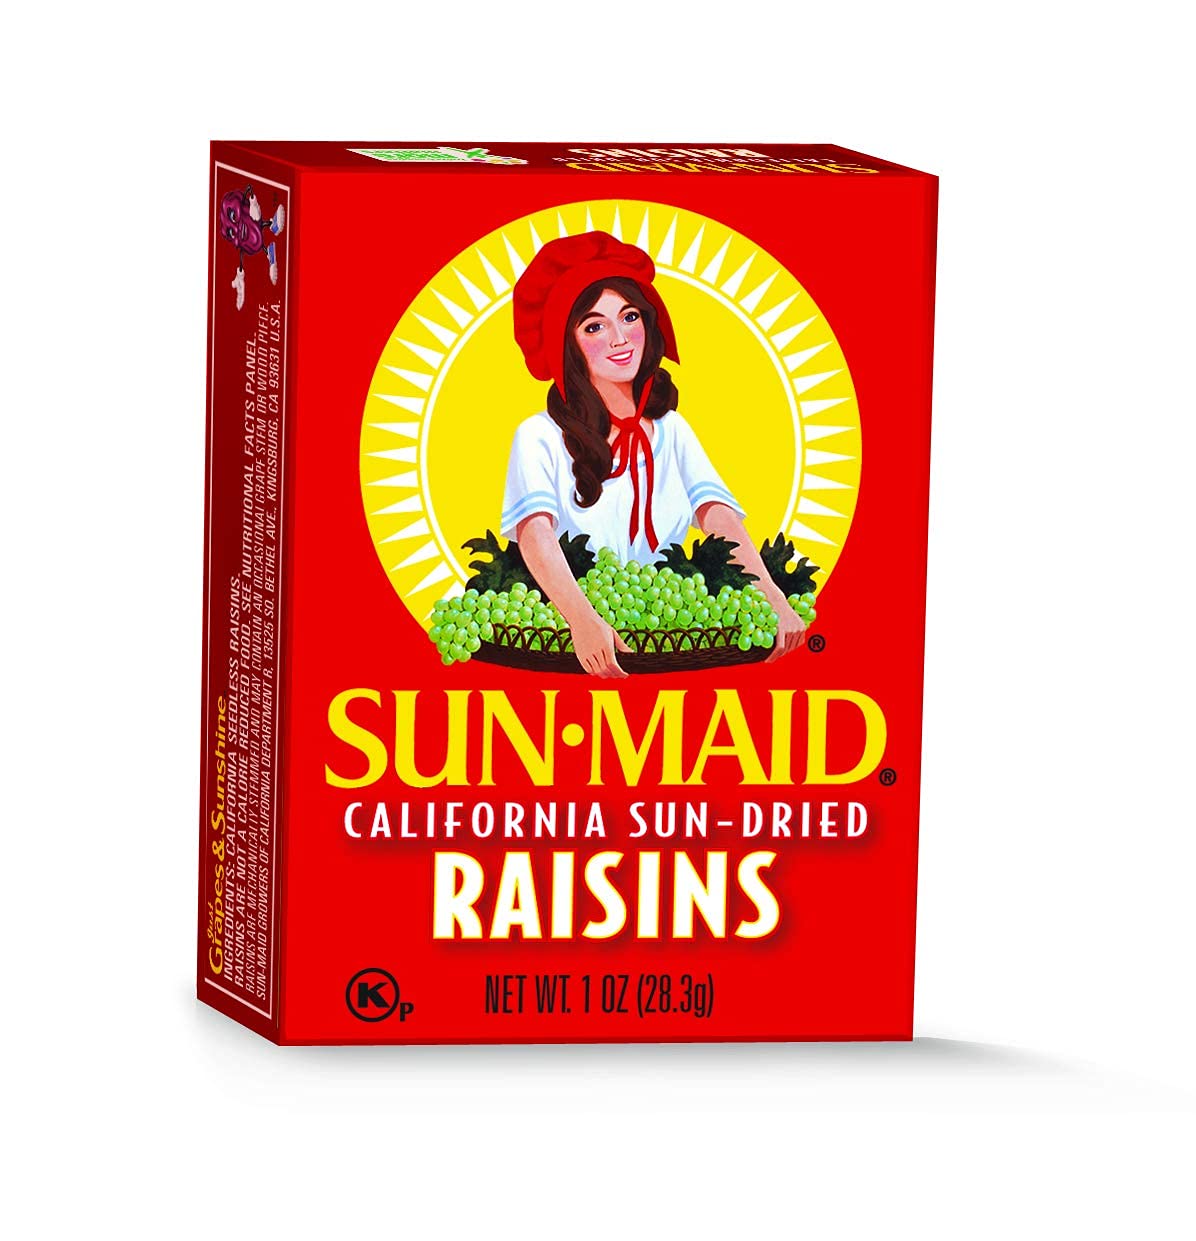 Sun-Maid California Sun-Dried Raisins - (24 Pack) 1 oz Snack-Size Box - Dried Fruit Snack for Lunches, Snacks, and Natural Sweeteners : Everything Else